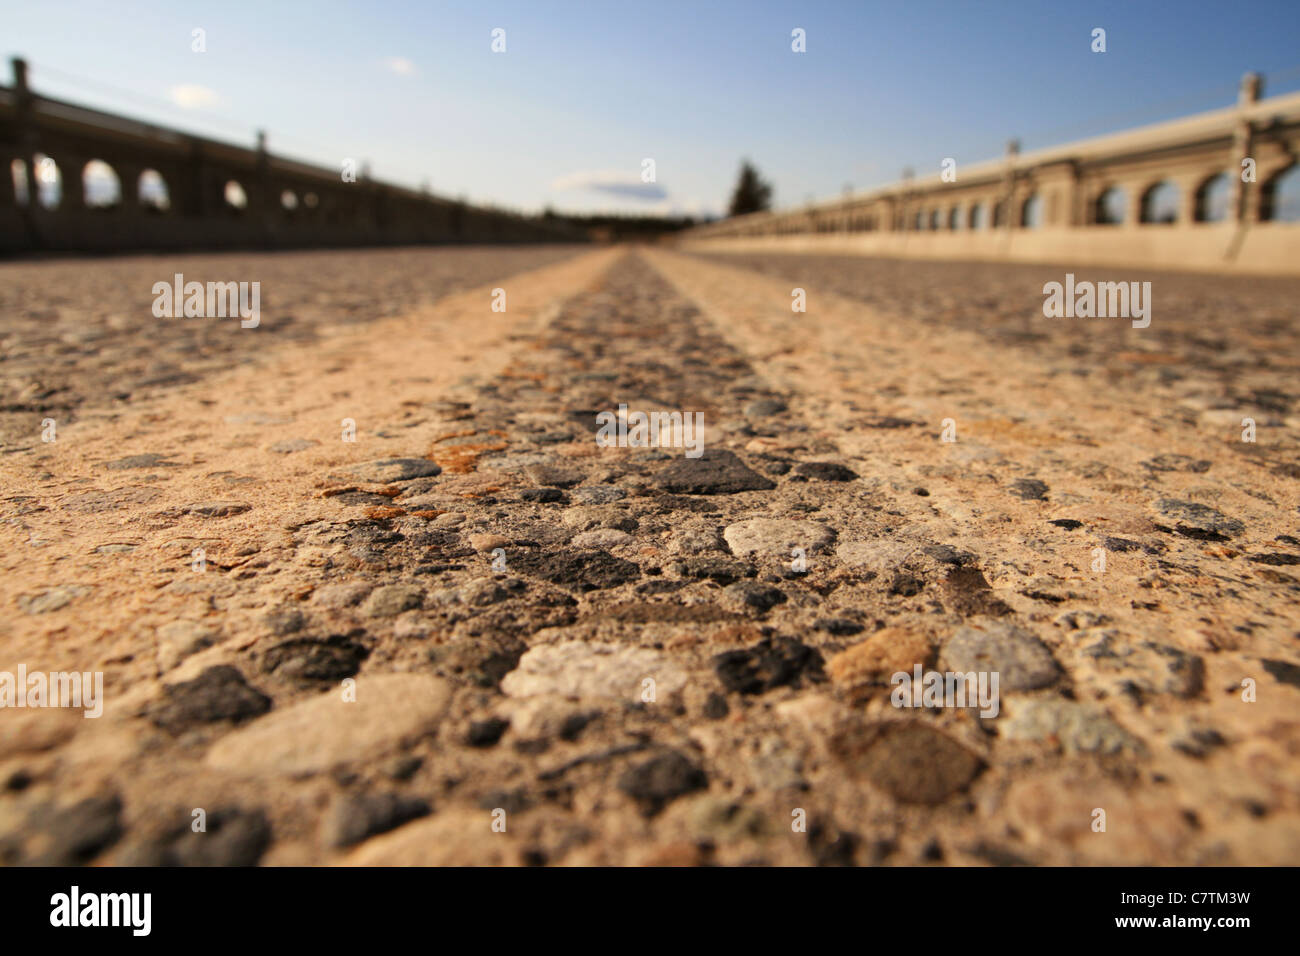 view from very close to the pavement in the center of the roadway on a bridge with very shallow depth of field Stock Photo